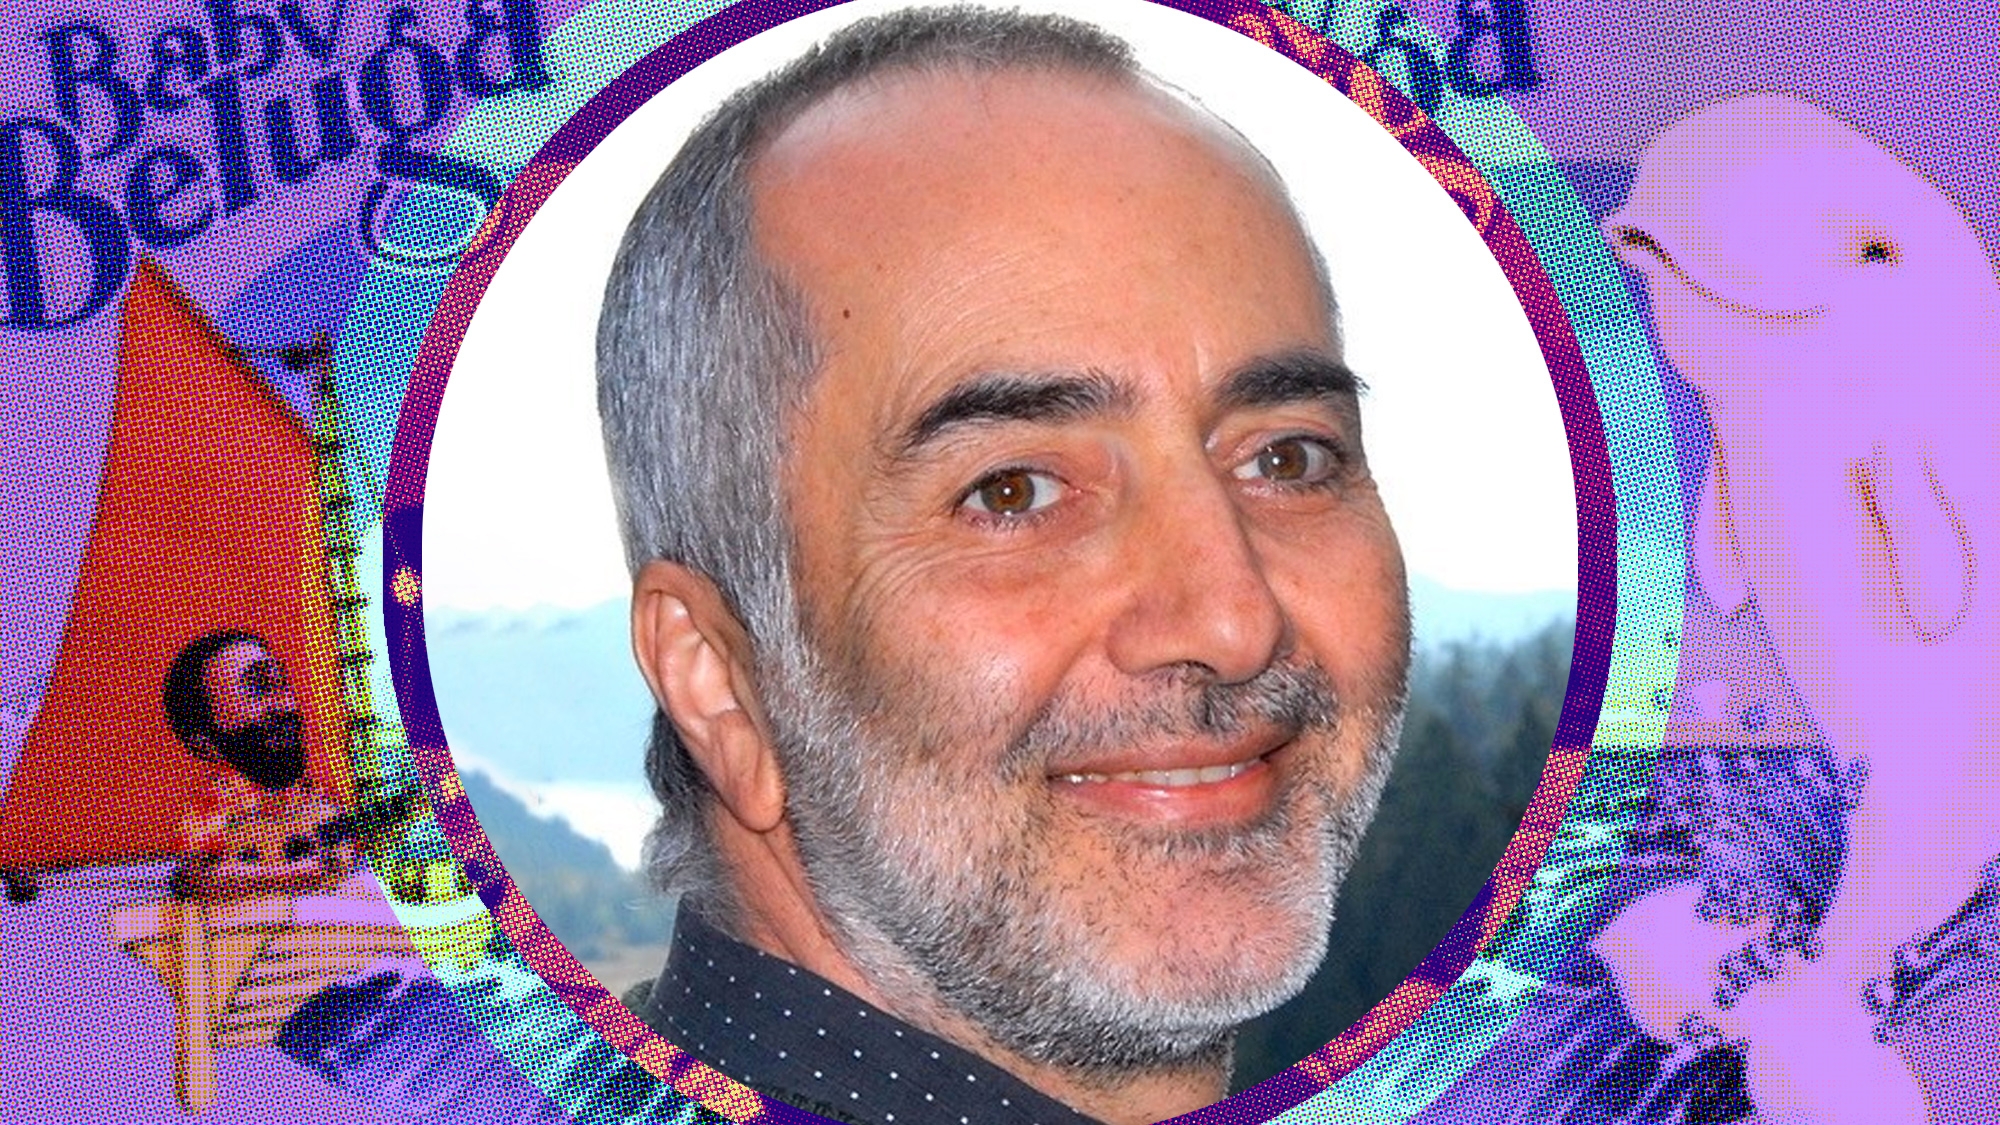 “Raffi for President”: The children’s music icon looks back on his playful life and career